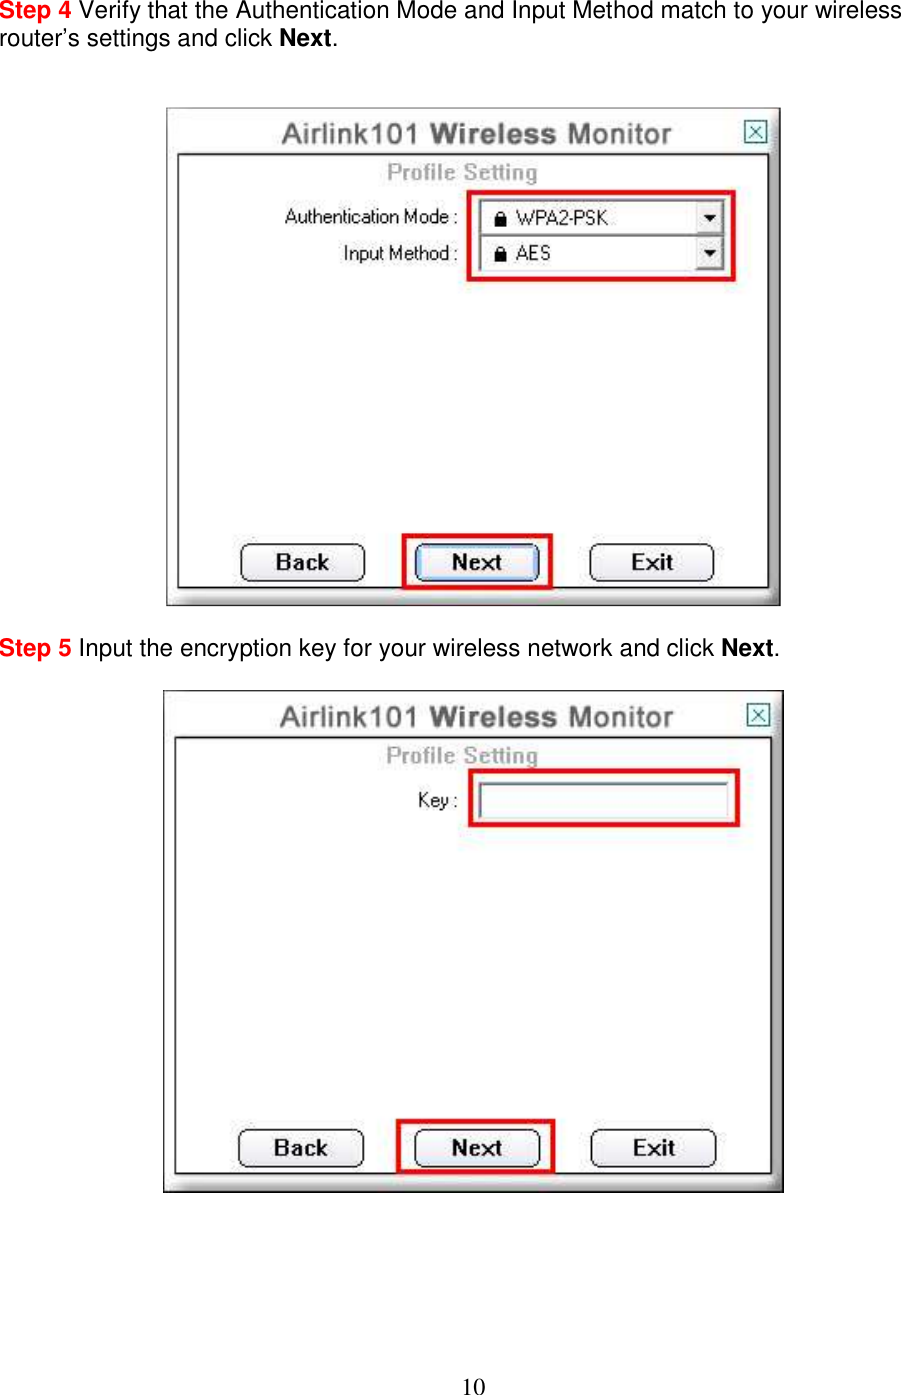 10 Step 4 Verify that the Authentication Mode and Input Method match to your wireless router’s settings and click Next.     Step 5 Input the encryption key for your wireless network and click Next.        